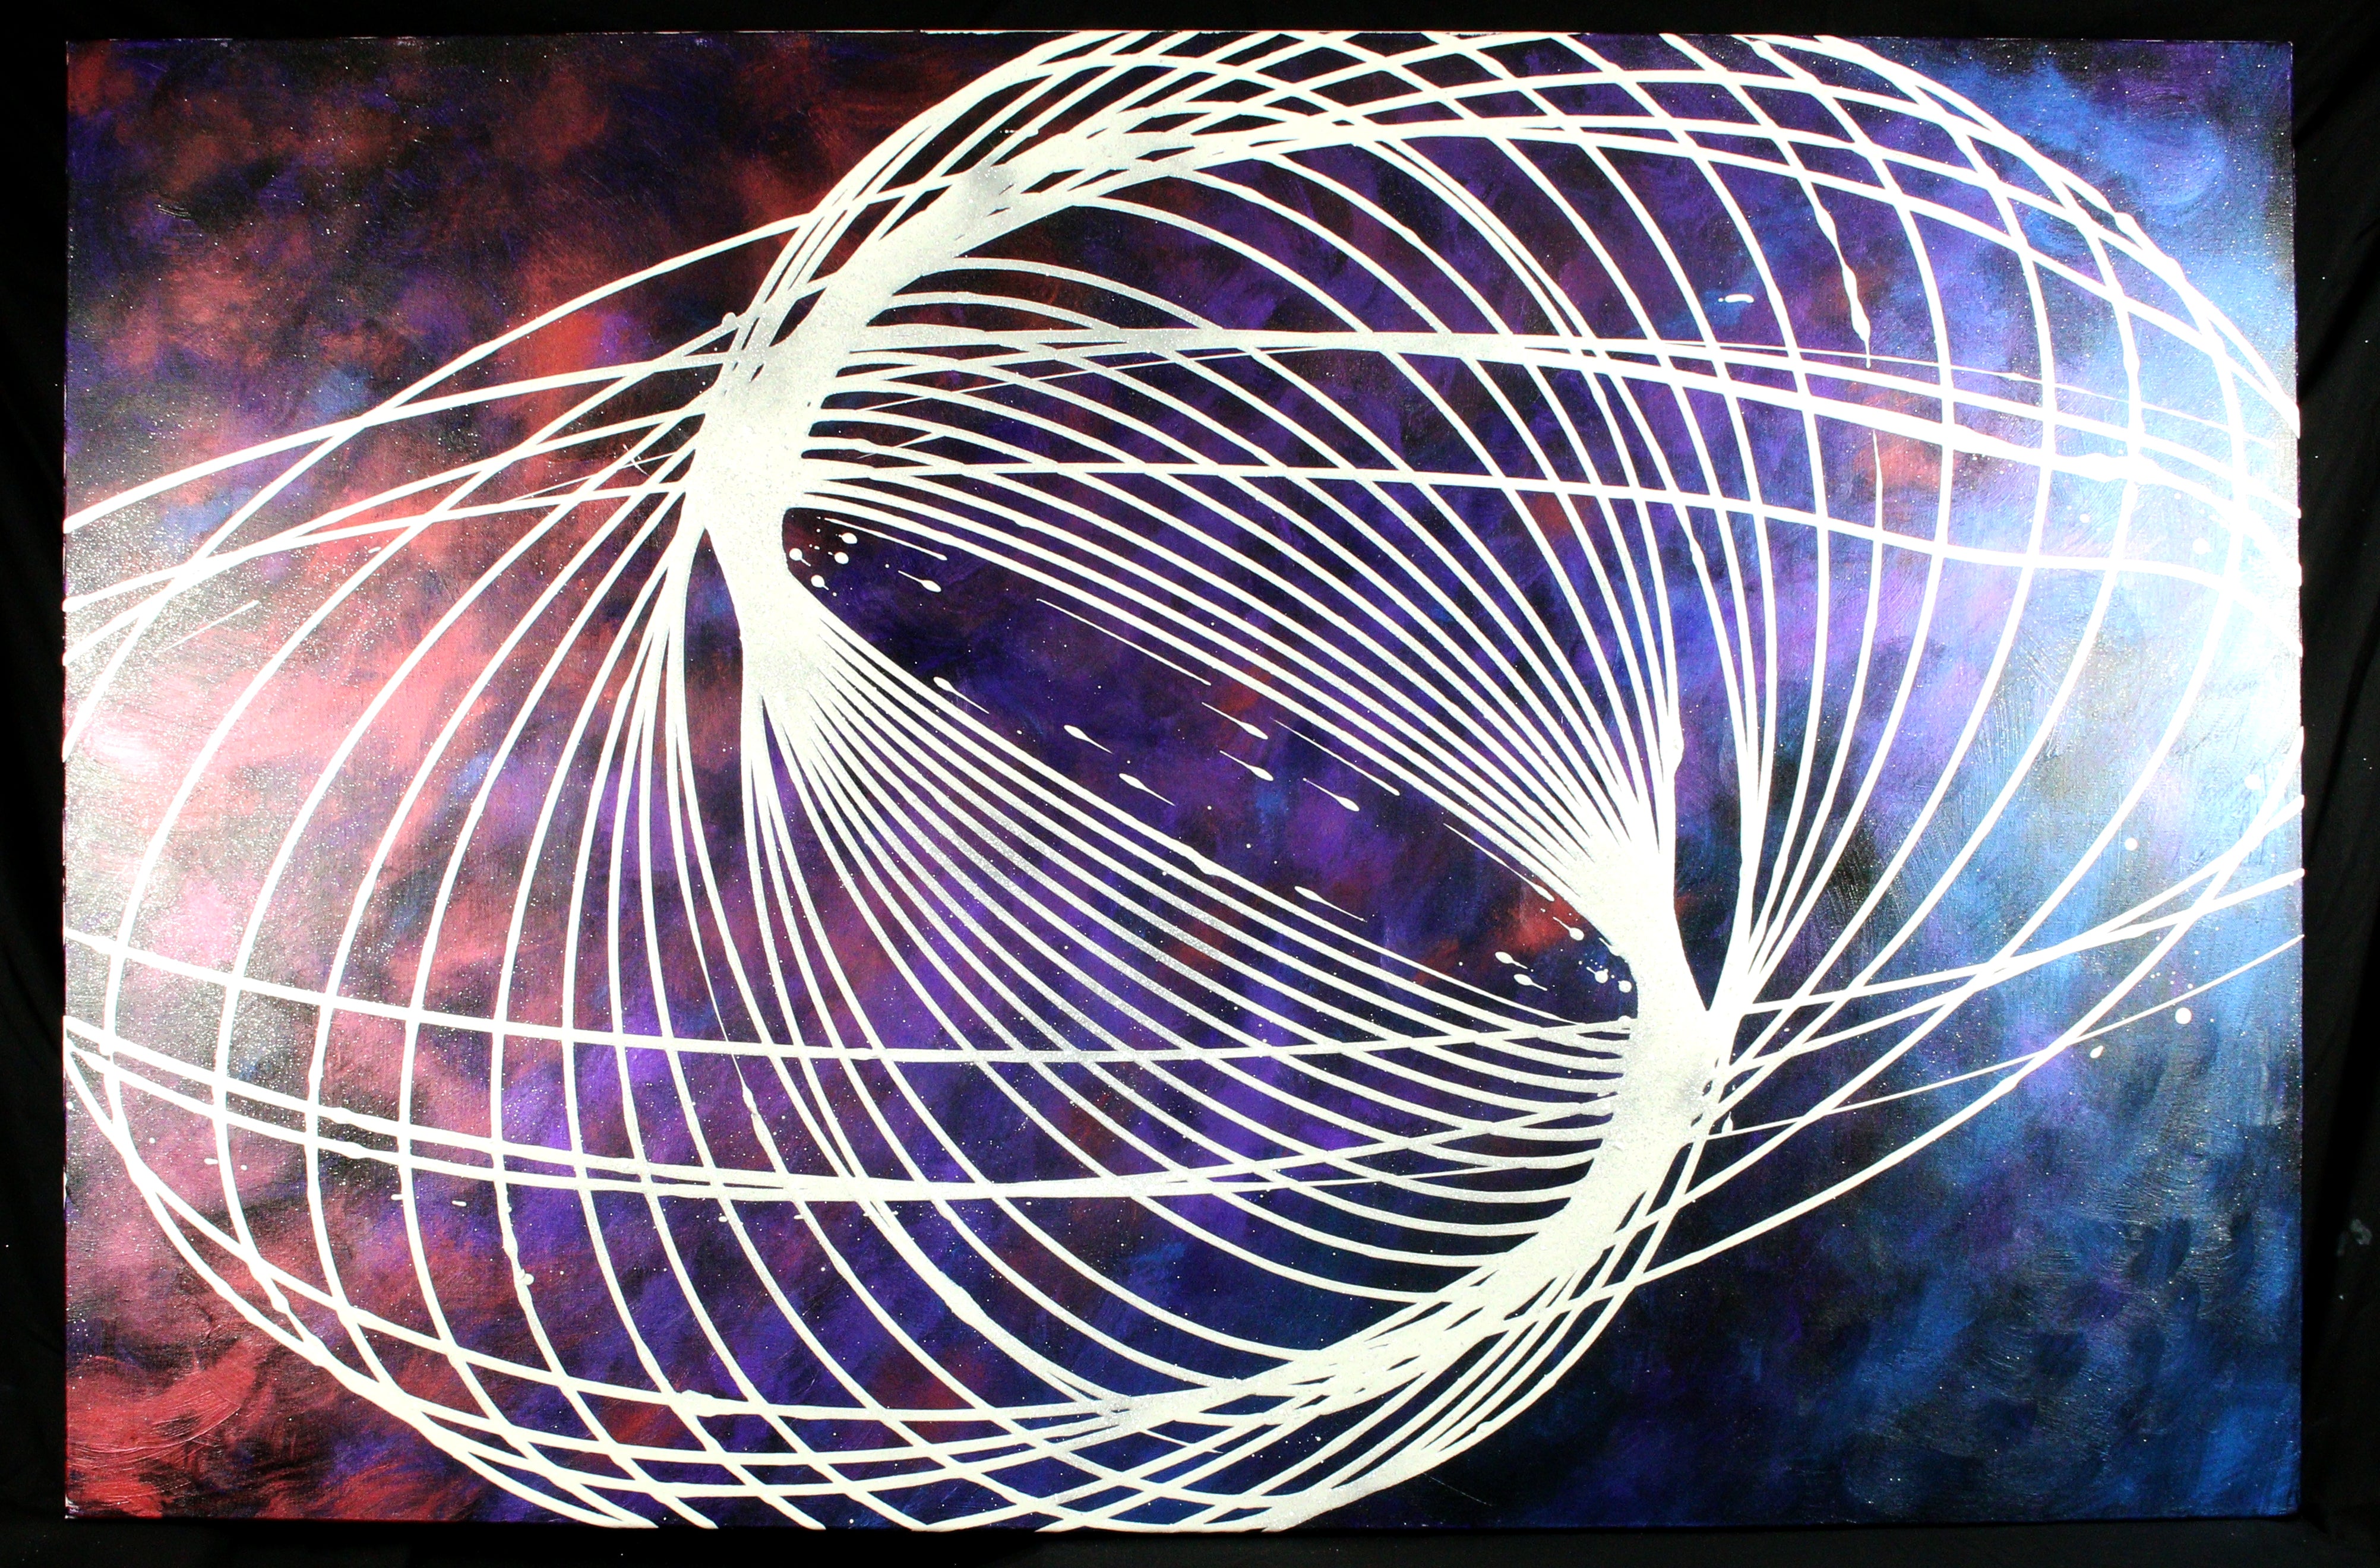 6. Galaxy pendulum painting with white circles of paint overlapping on a space background